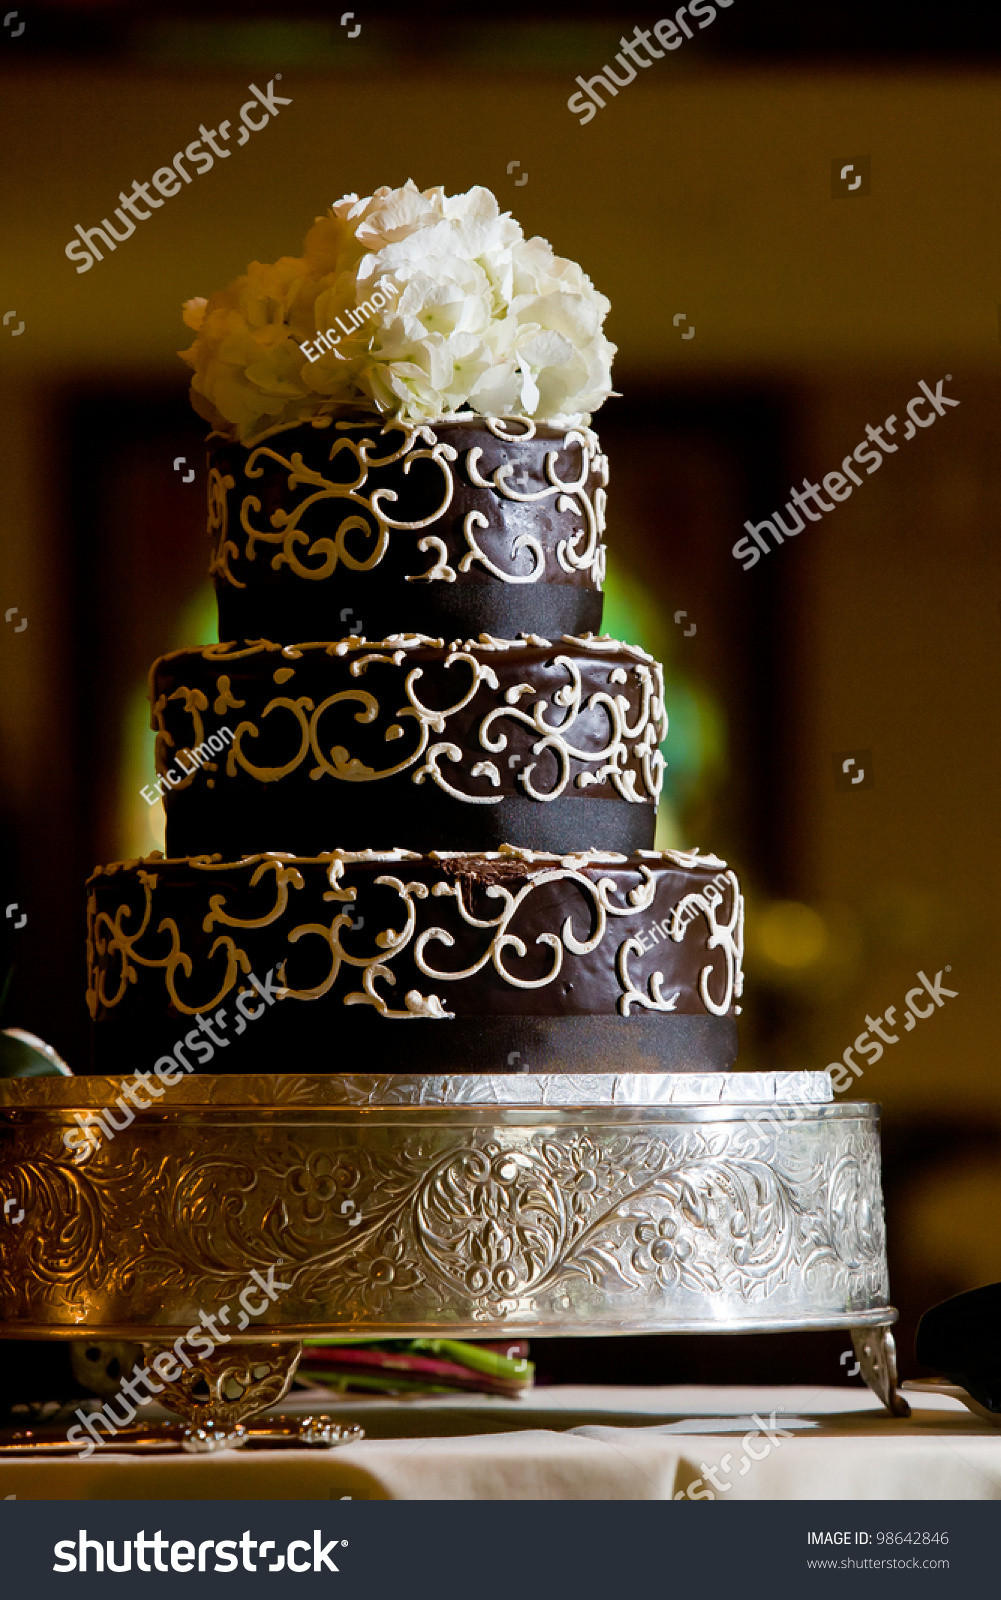 Chocolate Frosted Wedding Cakes
 A Chocolate Wedding Cake With White Frosting Details And